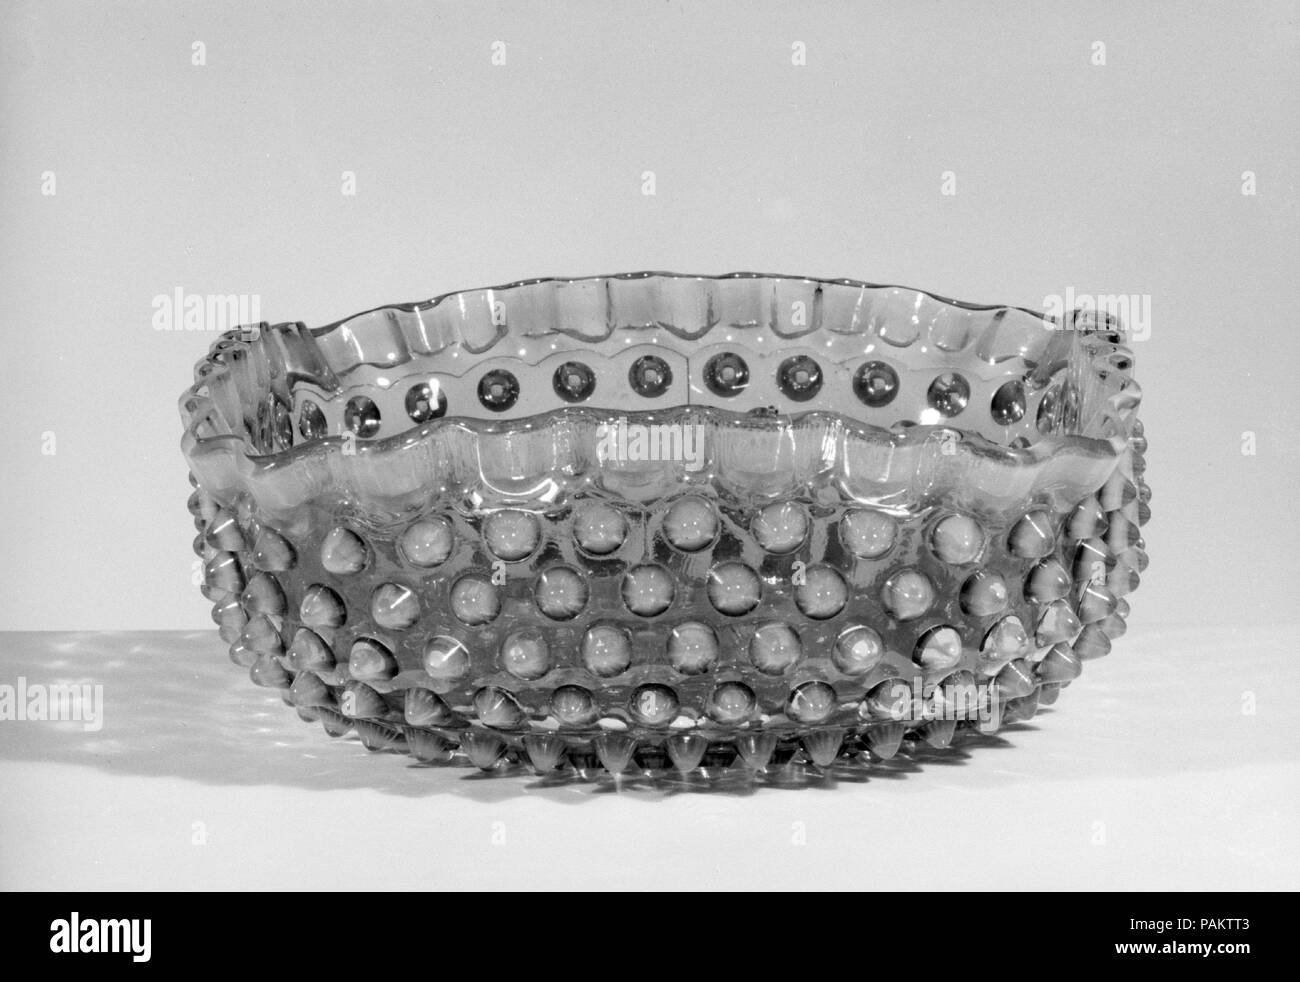 Hobnail Fruit Bowl. Culture: American. Dimensions: 3 3/16 x 8 in. (8.1 x 20.3 cm). Maker: Probably Hobbs, Brockunier and Company (1863-1891). Date: after 1886. Museum: Metropolitan Museum of Art, New York, USA. Stock Photo